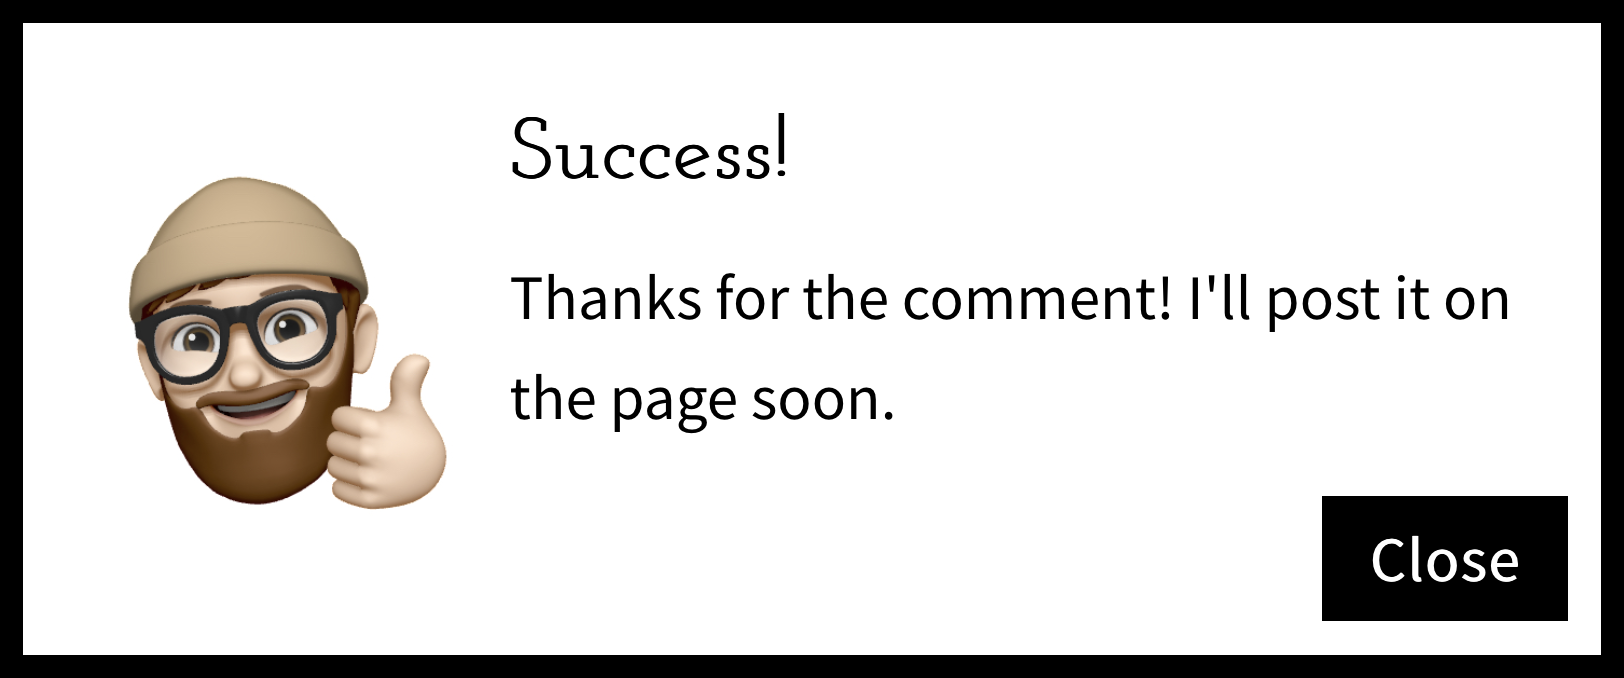 Success message when someone submits a comment.